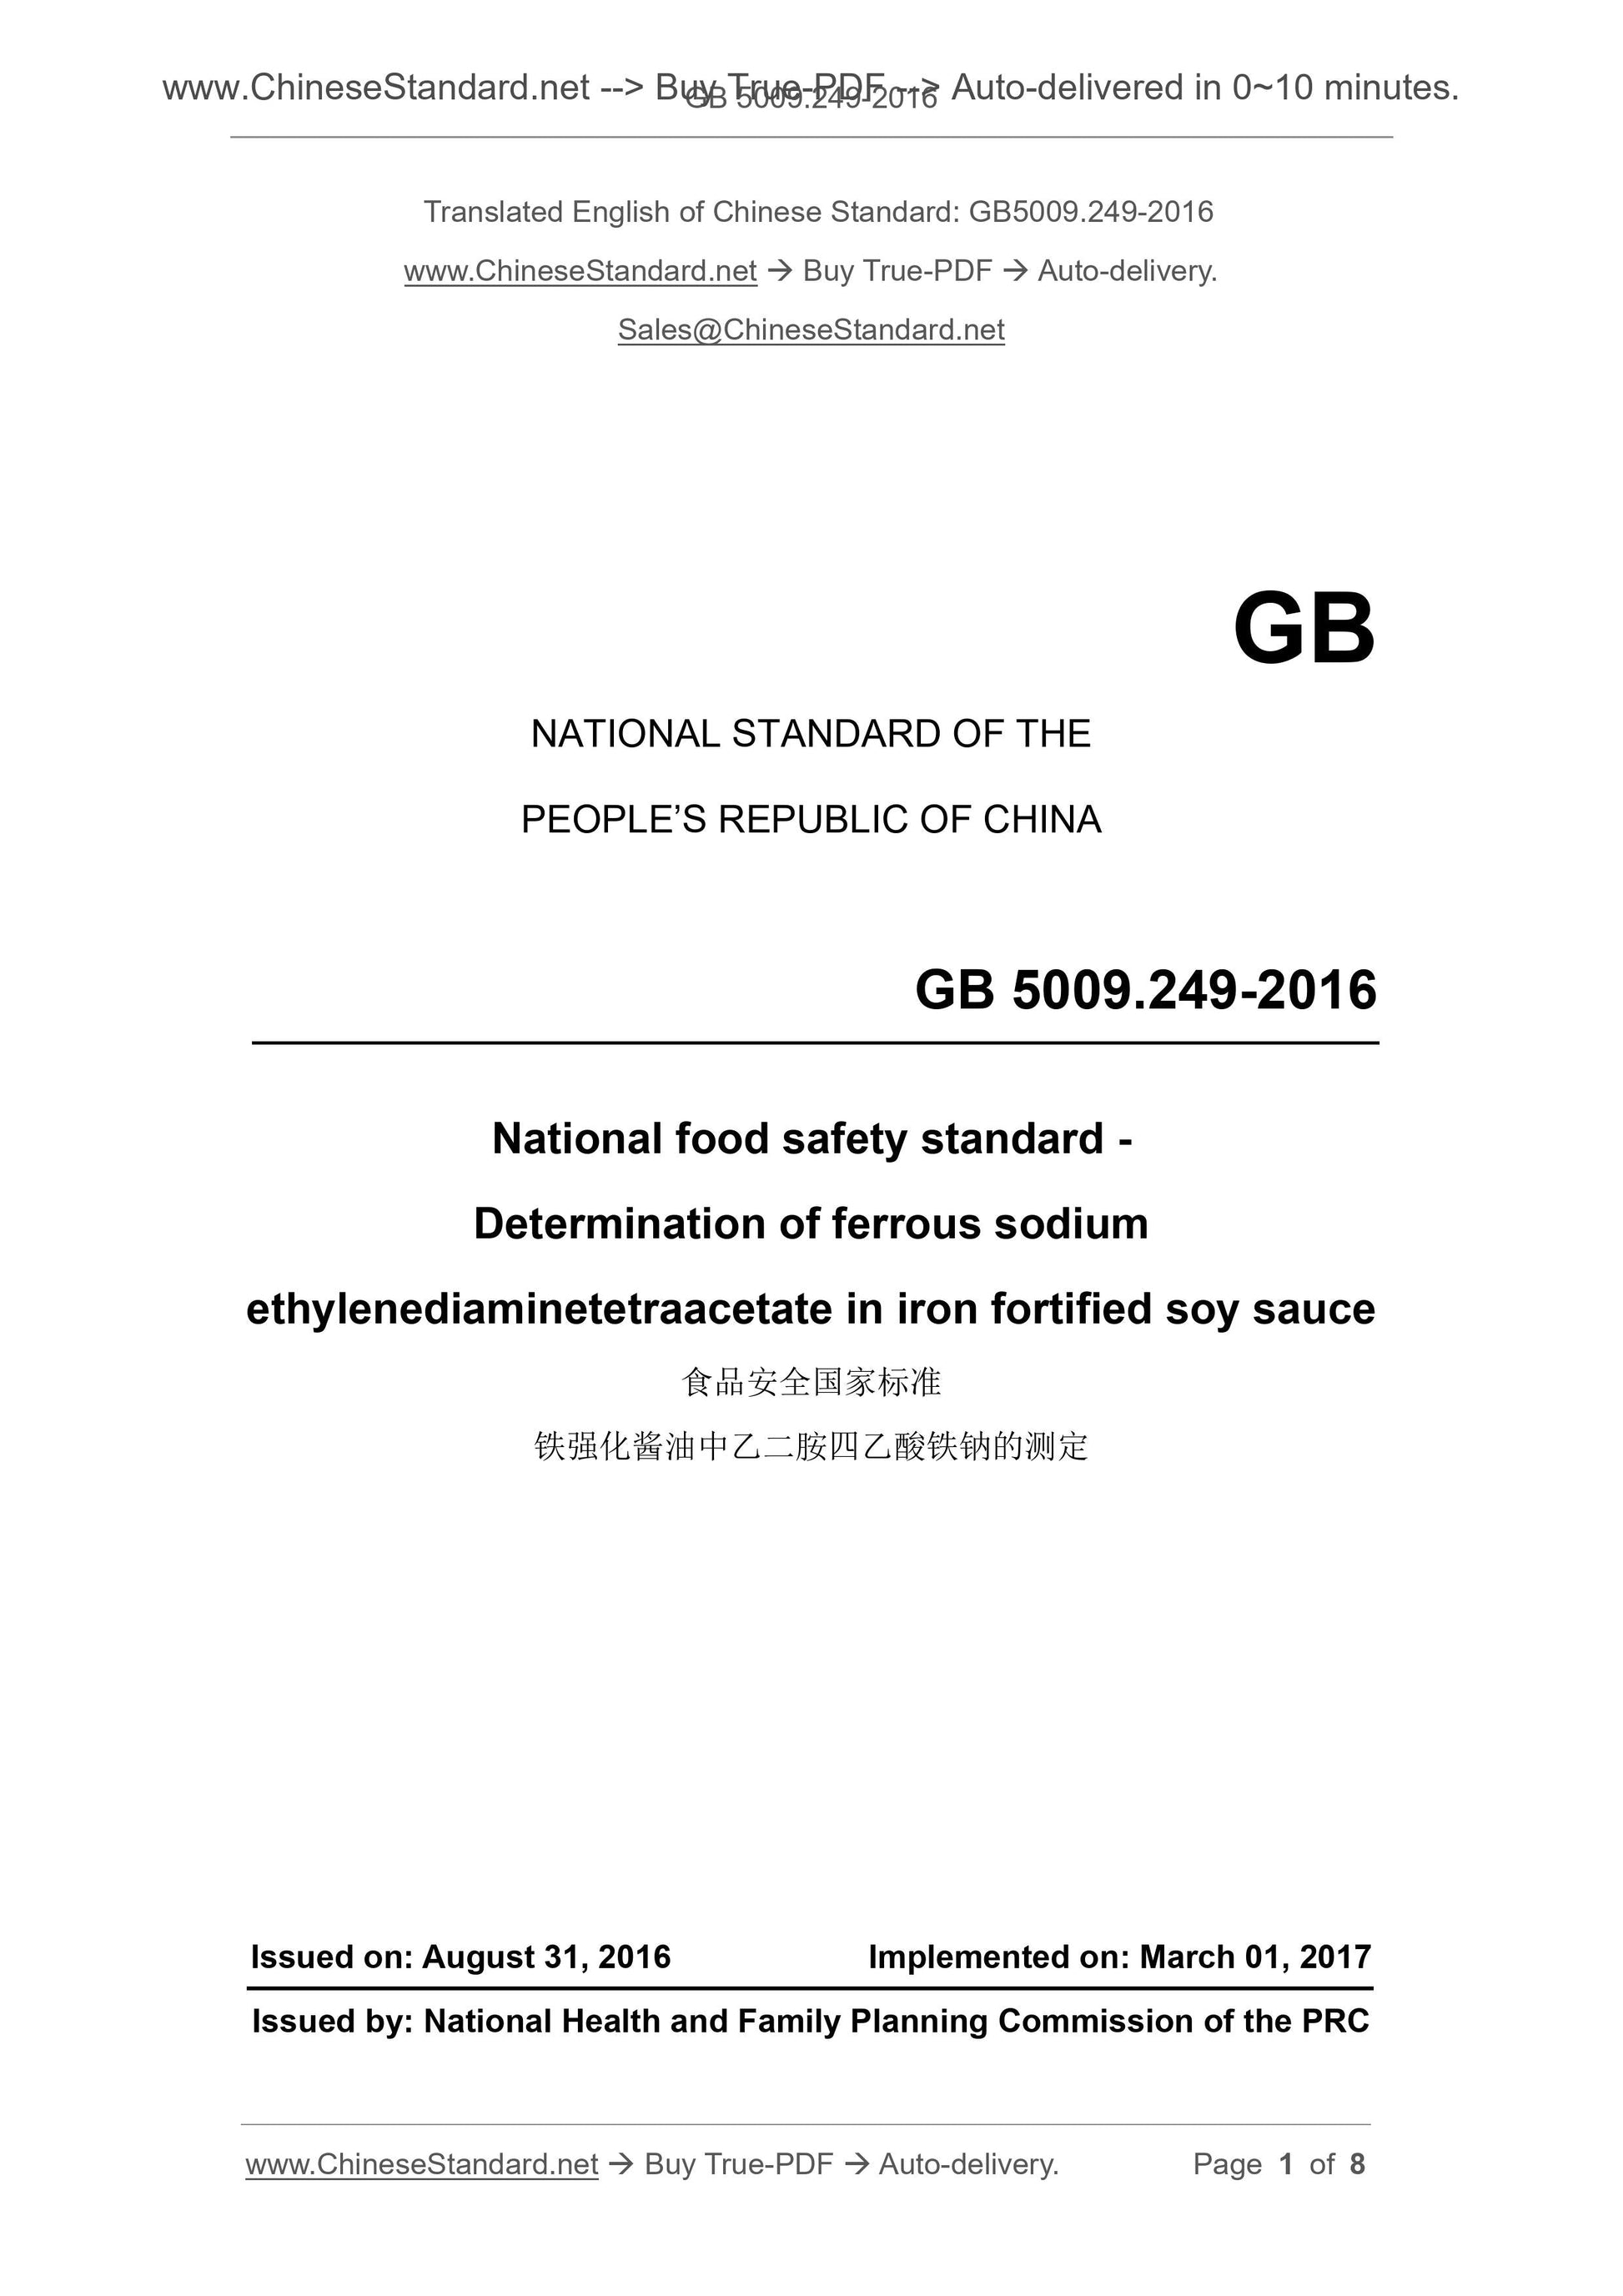 GB 5009.249-2016 Page 1